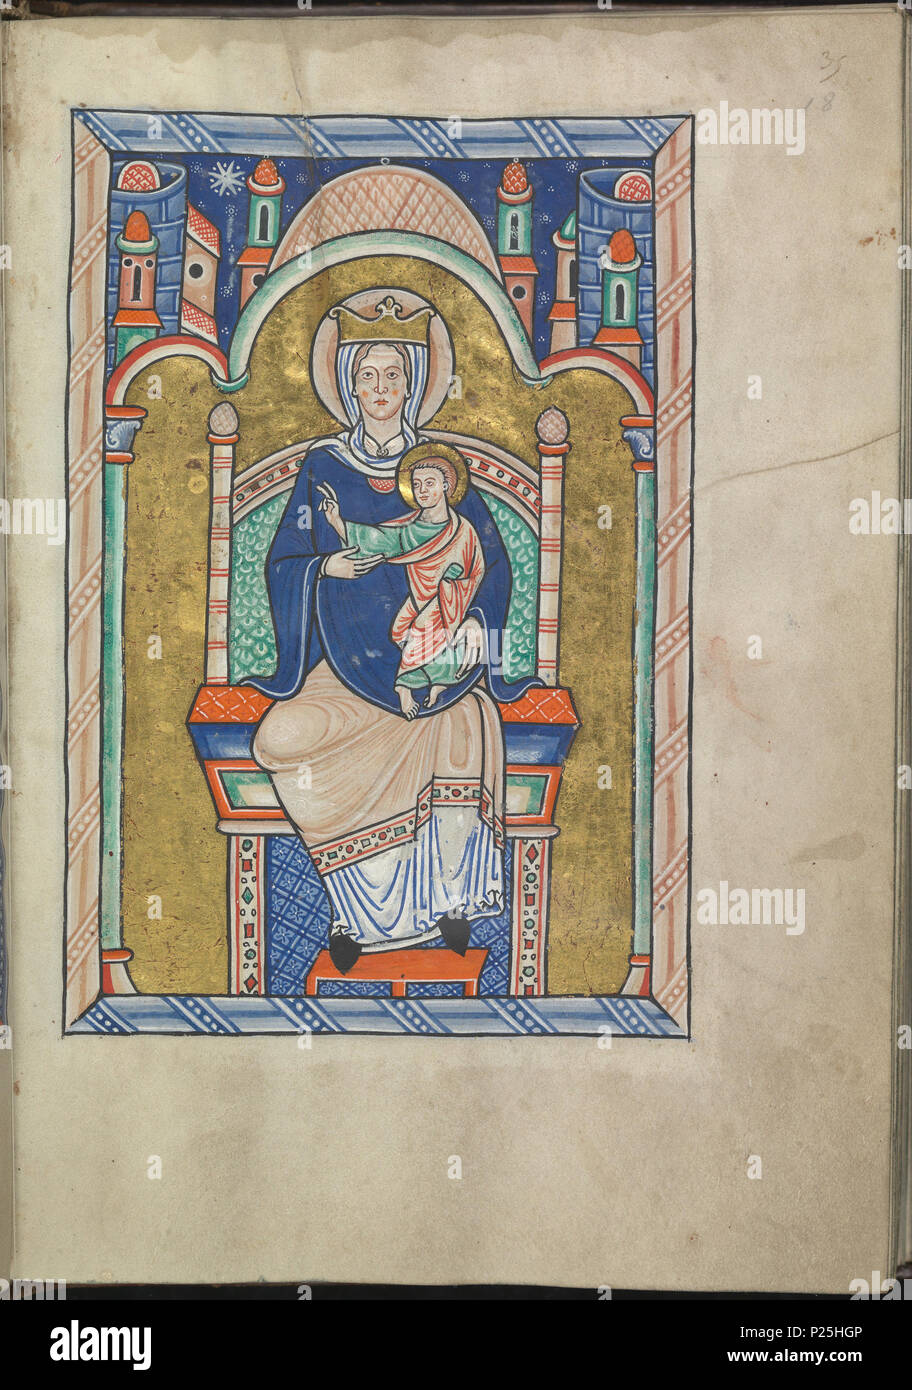 155 Images from the life of Christ - Mary enthroned, holding the Christ-child from the adoration of the Christ-child by the Magi - Psalter of Eleanor of Aquitaine (ca. 1185) - KB 76 F 13, folium 018r Stock Photo